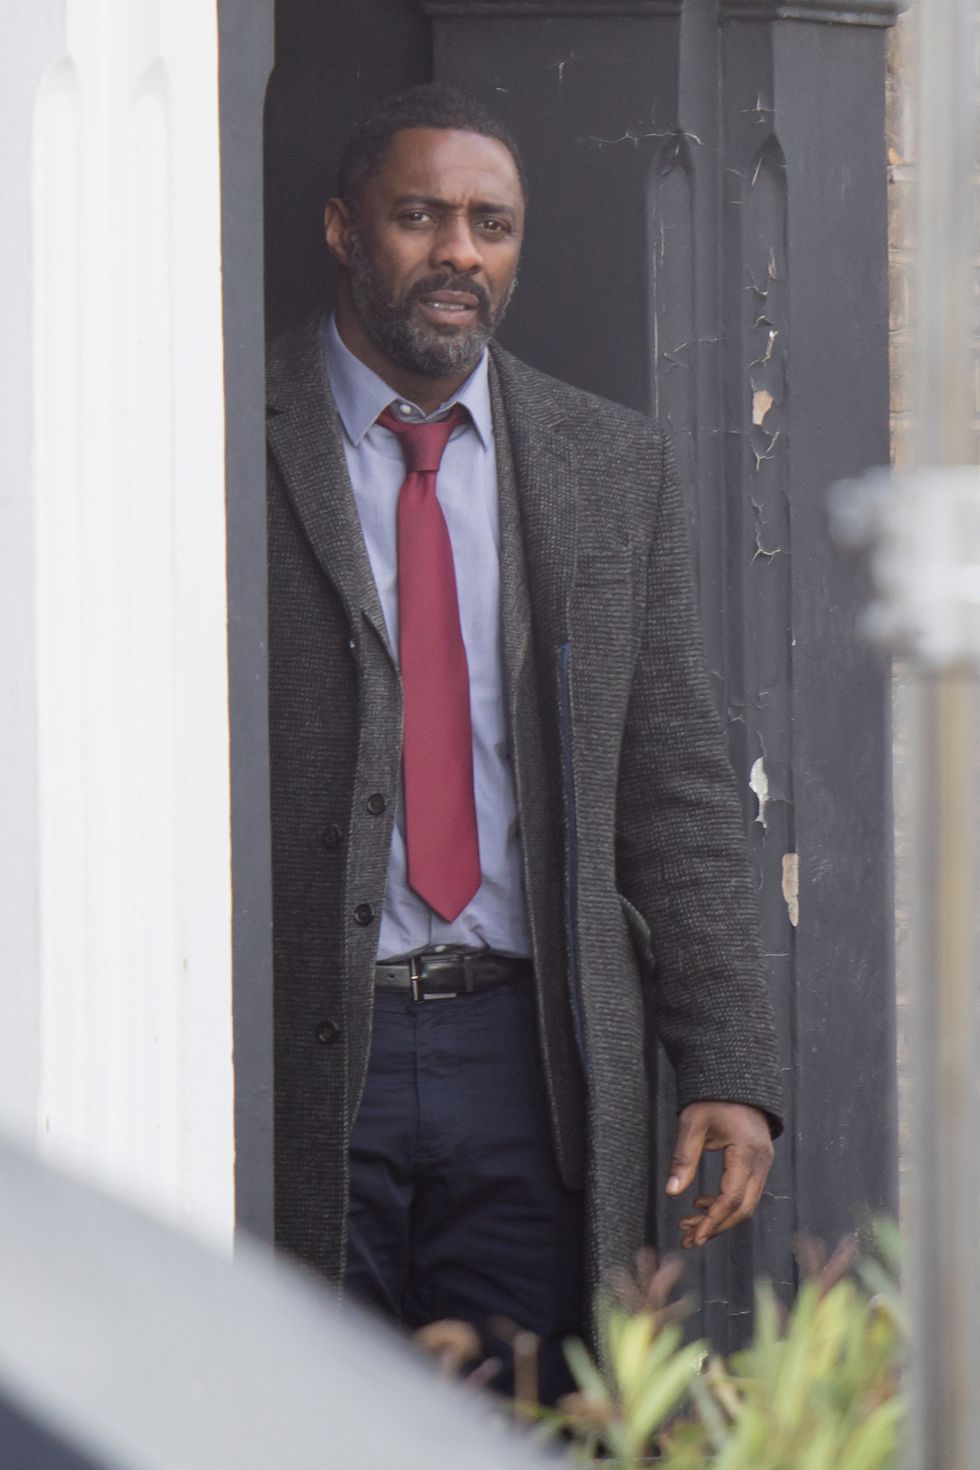   Idris Elba as Luther  images - BBC 